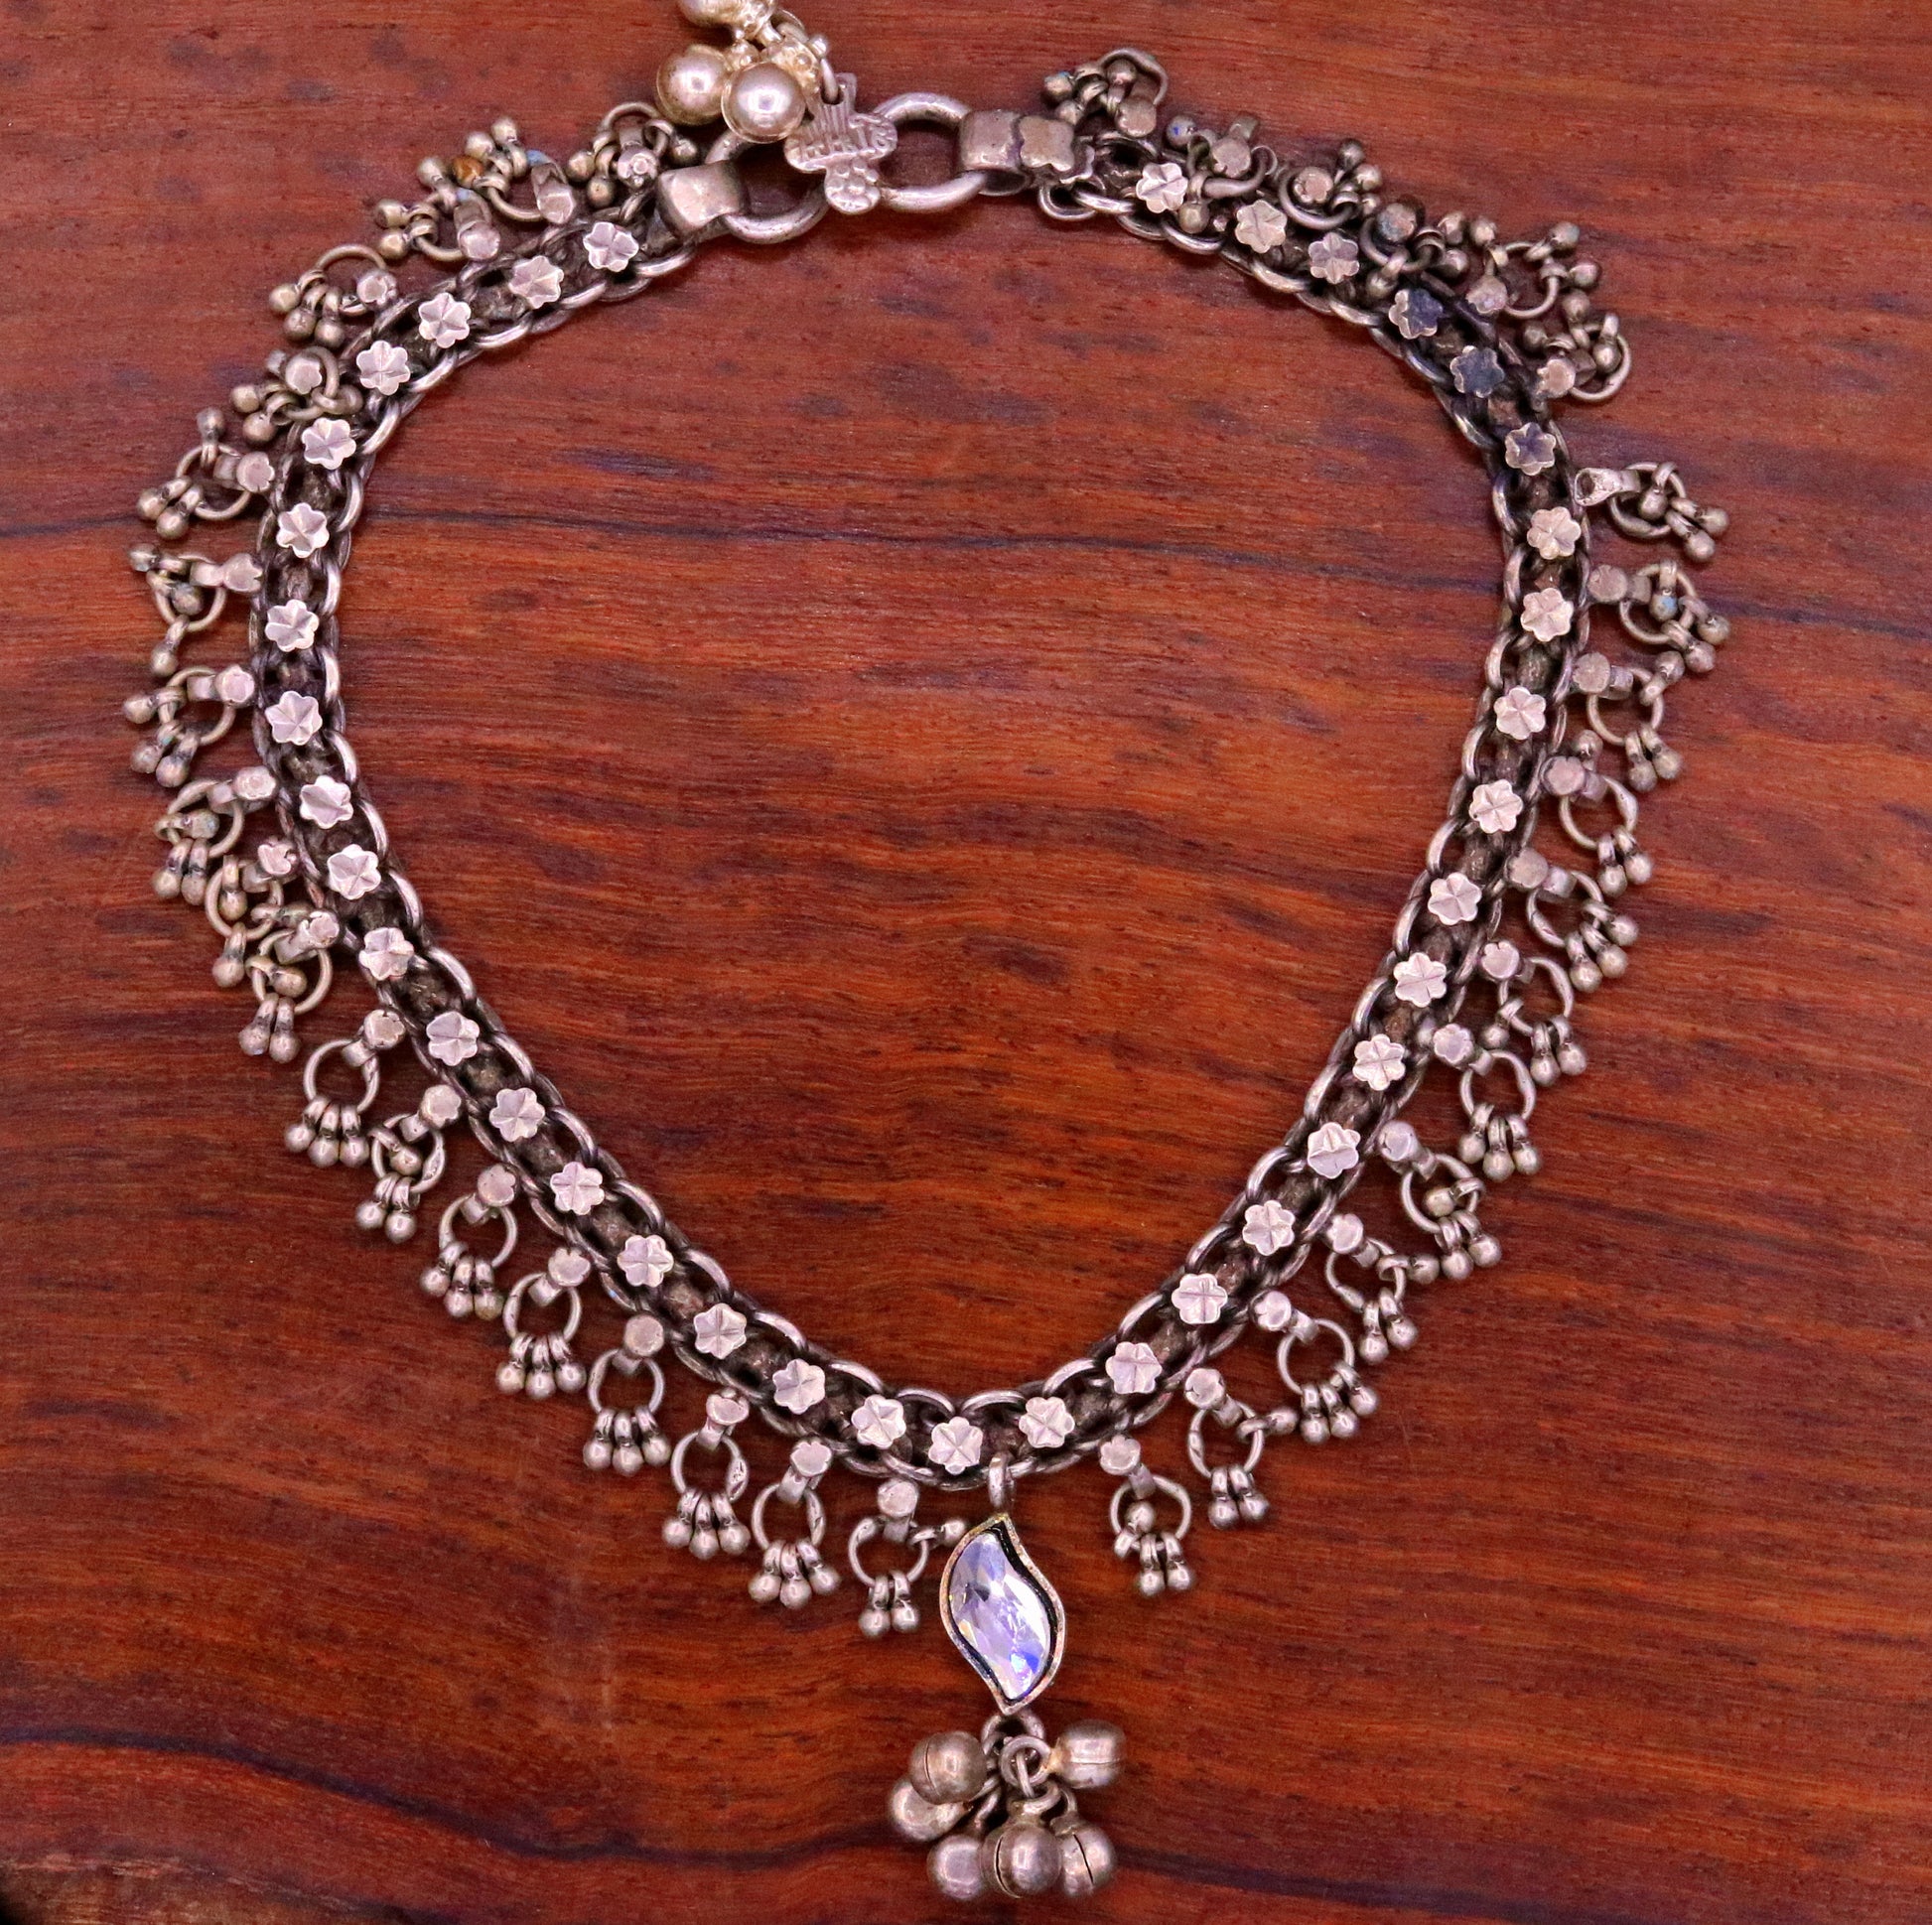 Vintage antique old silver anklet ankle bracelet, single ankle used tribal belly dance jewelry, charm foot bracelet from Rajasthan anko24 - TRIBAL ORNAMENTS